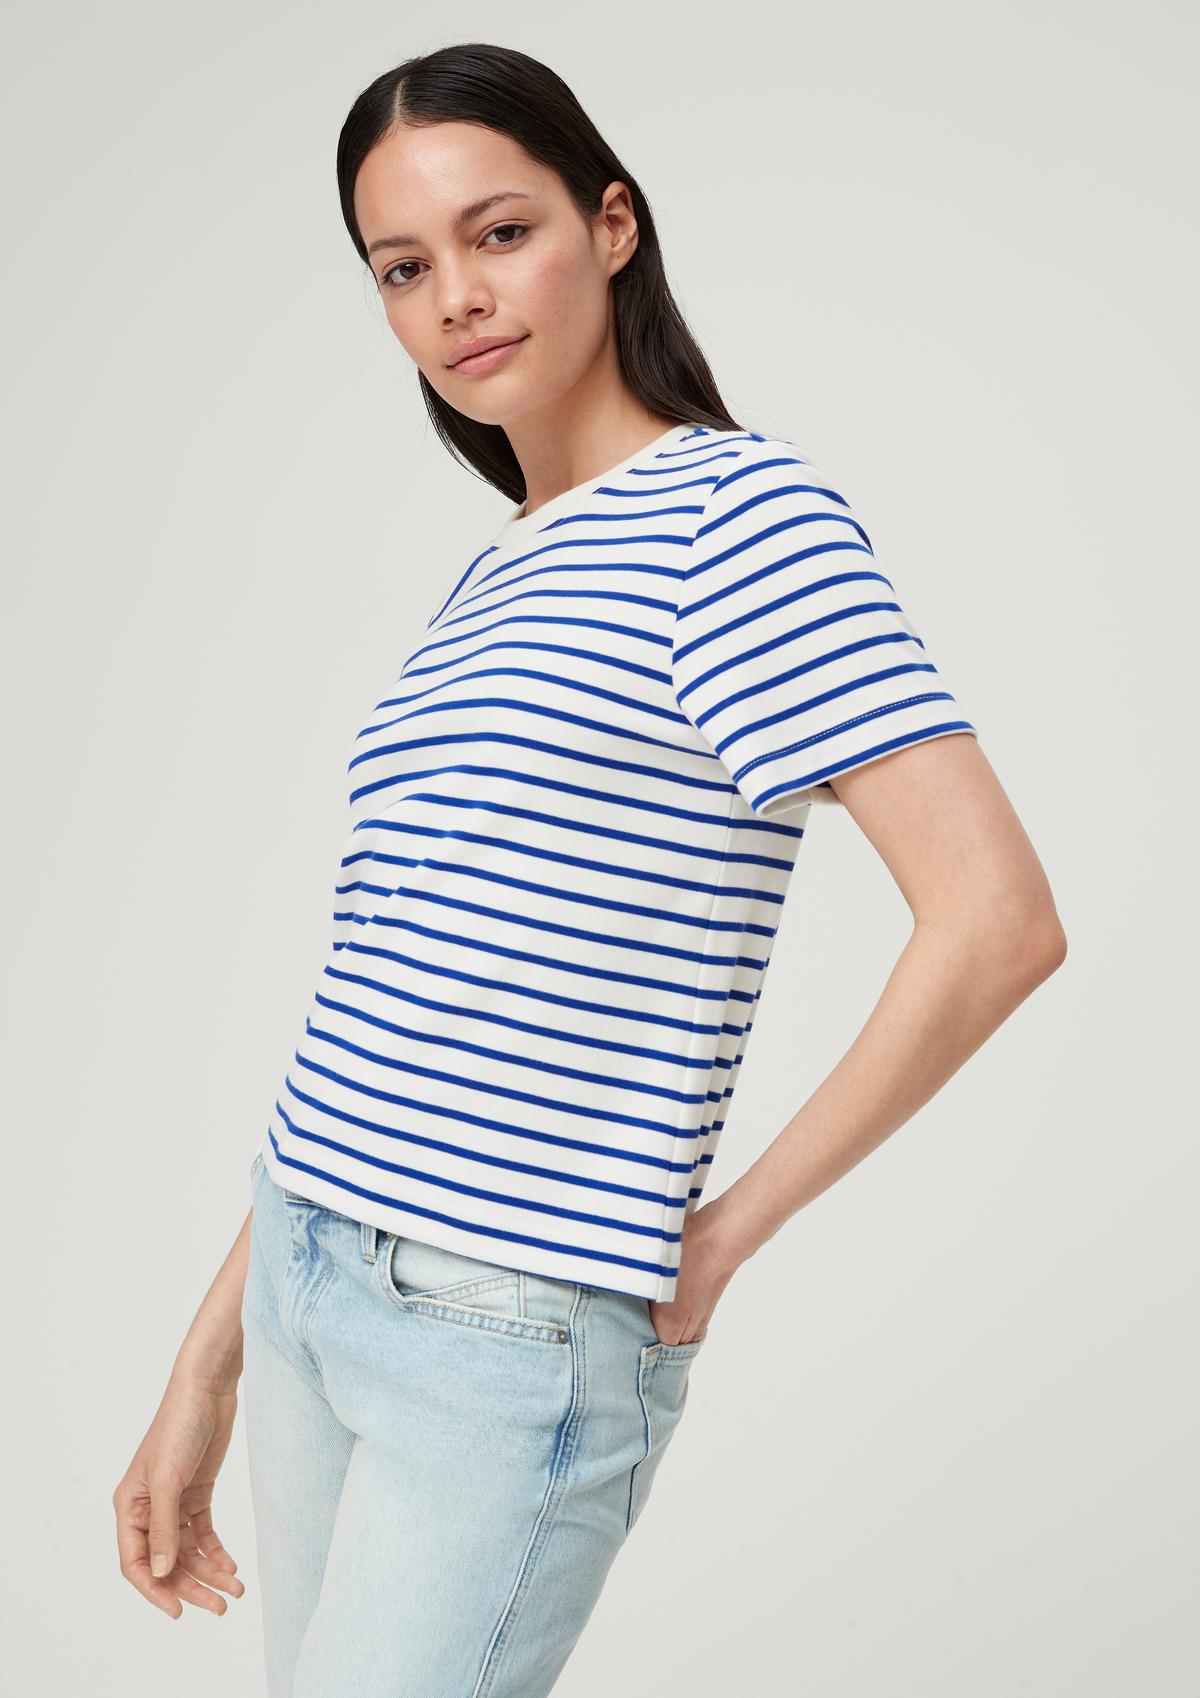 Slightly cropped cotton T-shirt